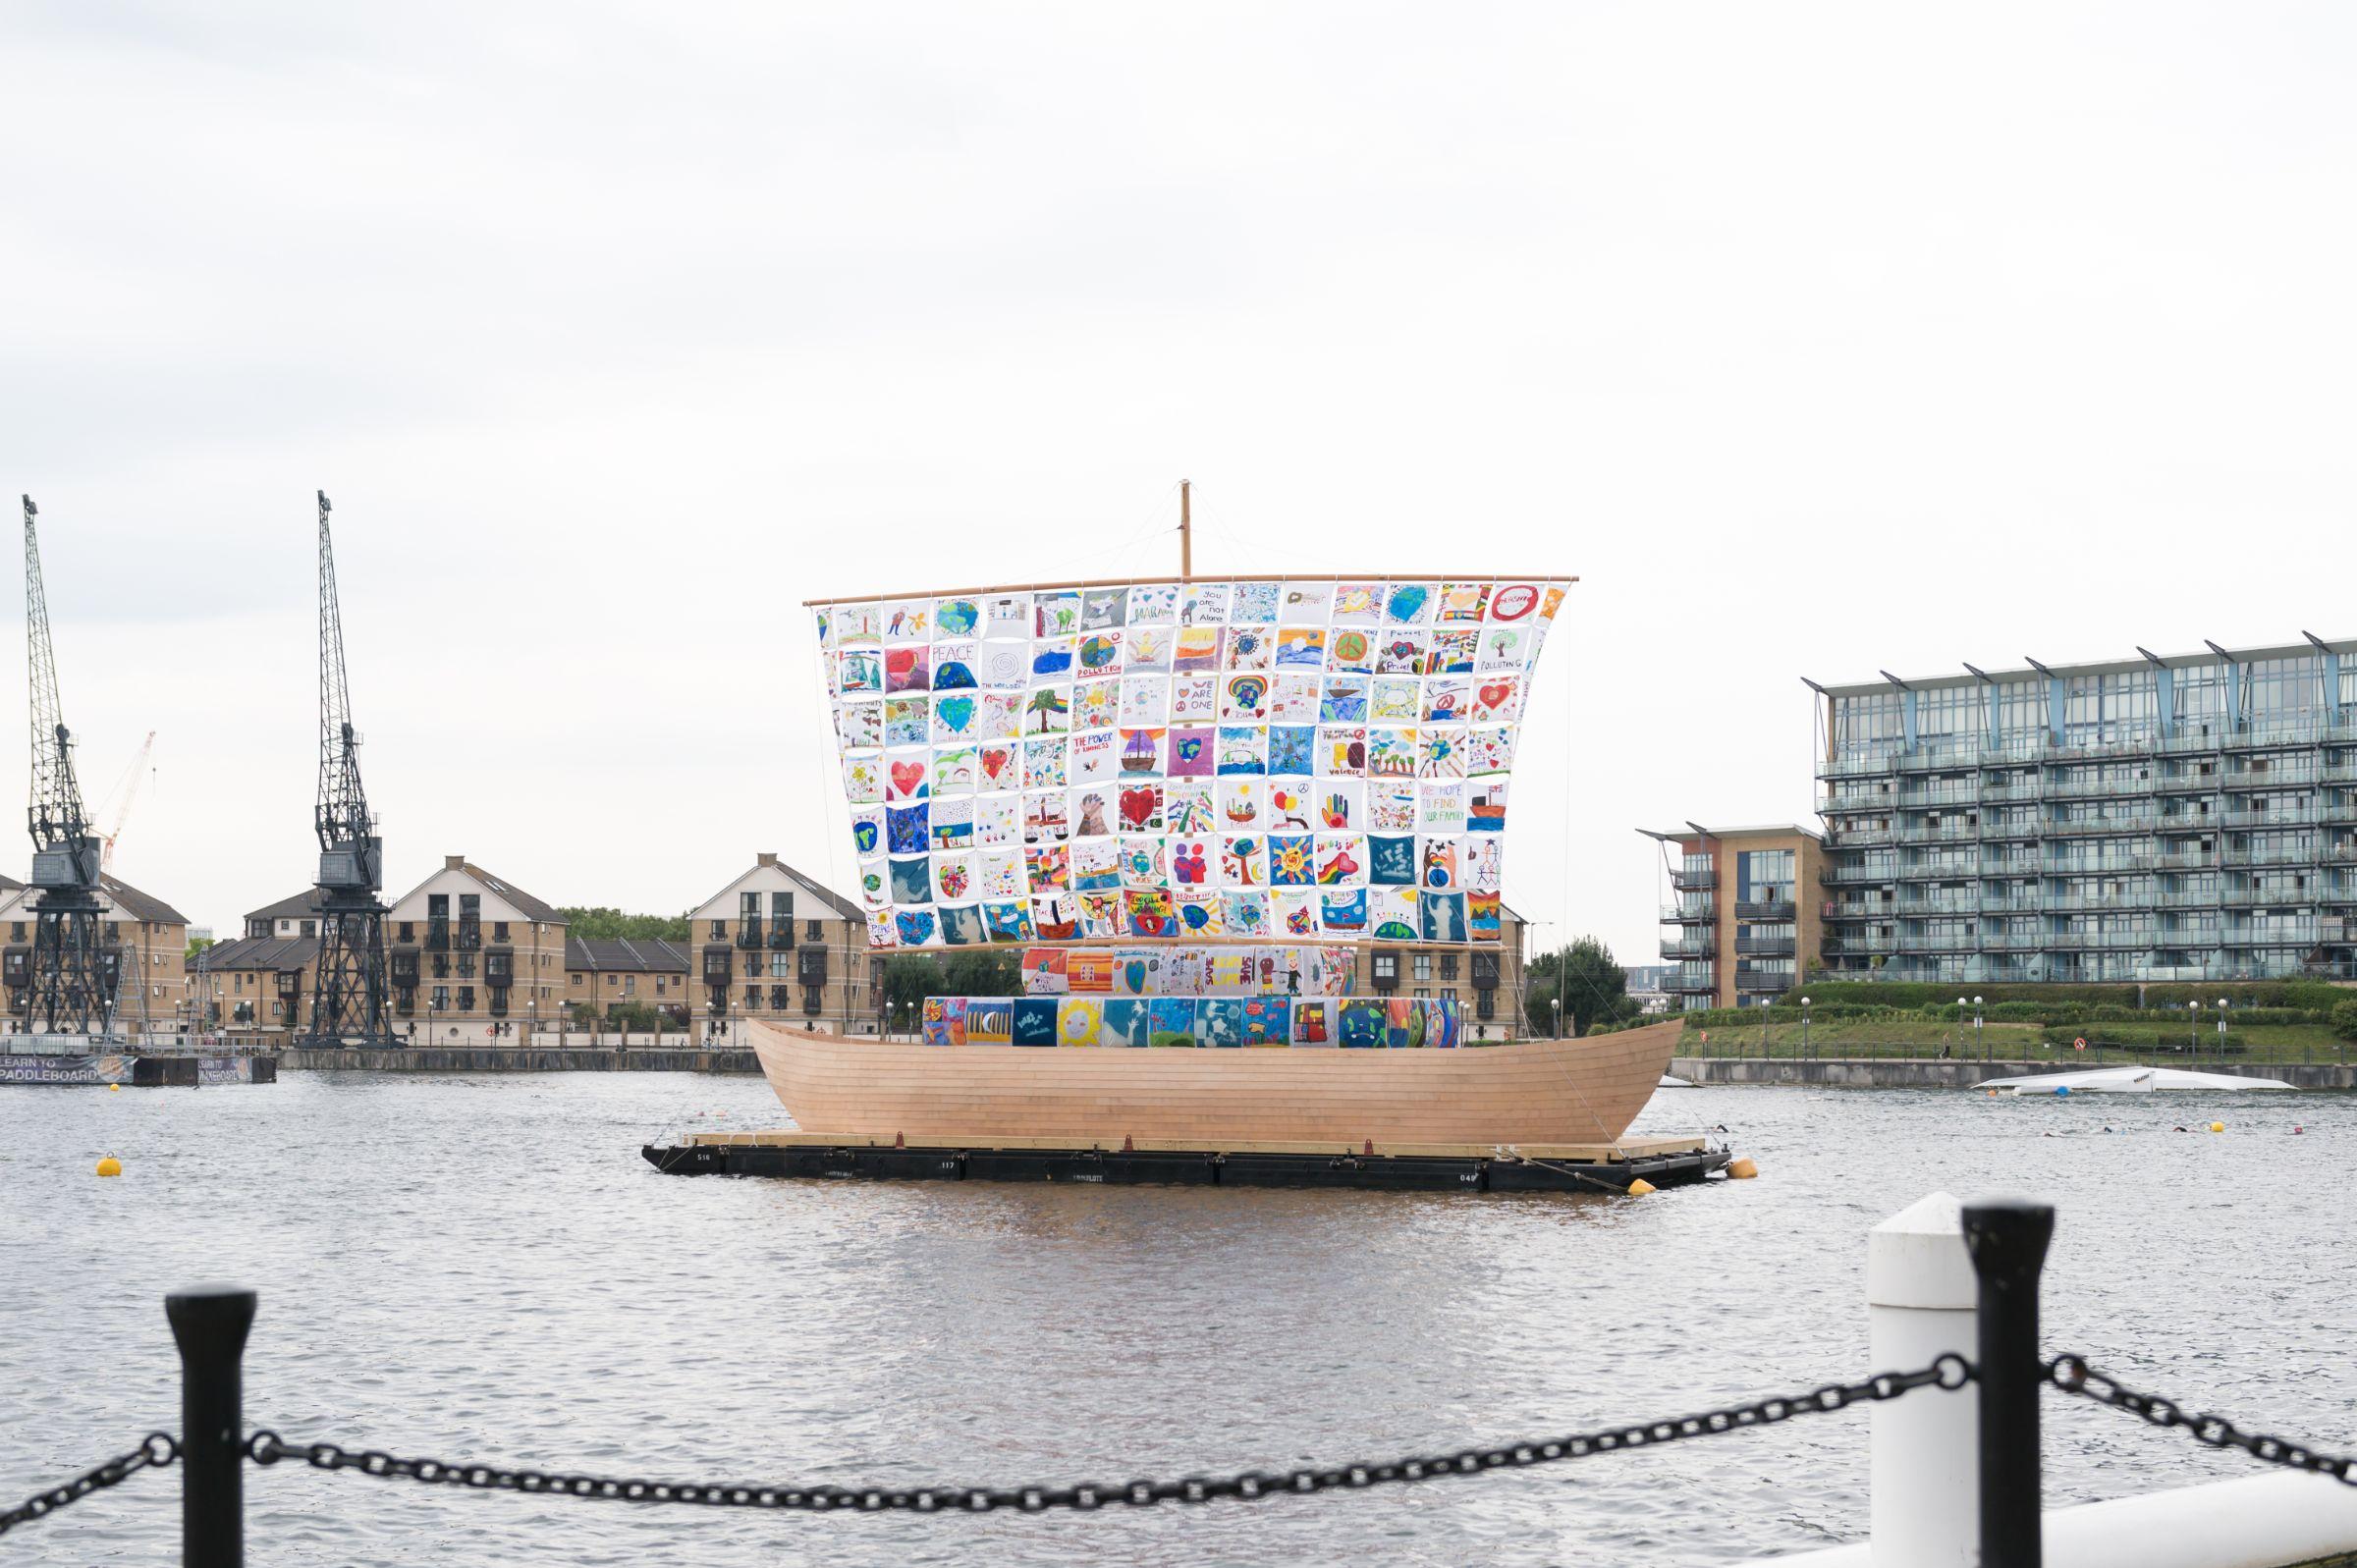 The Ship of Tolerance on the water at the Royal Docks